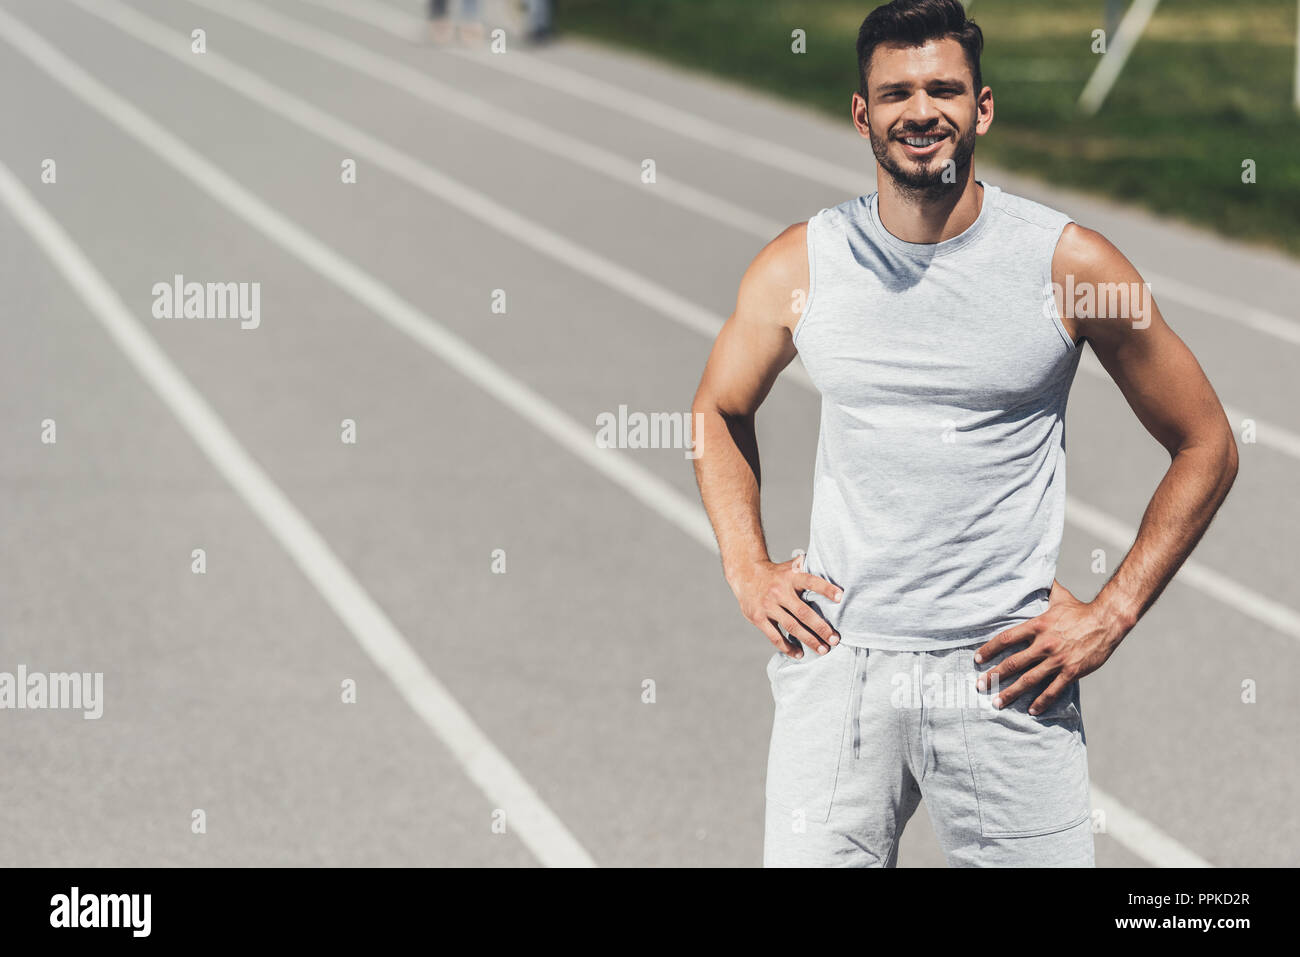 smiling young sporty man standing on running track with arms akimbo Stock Photo